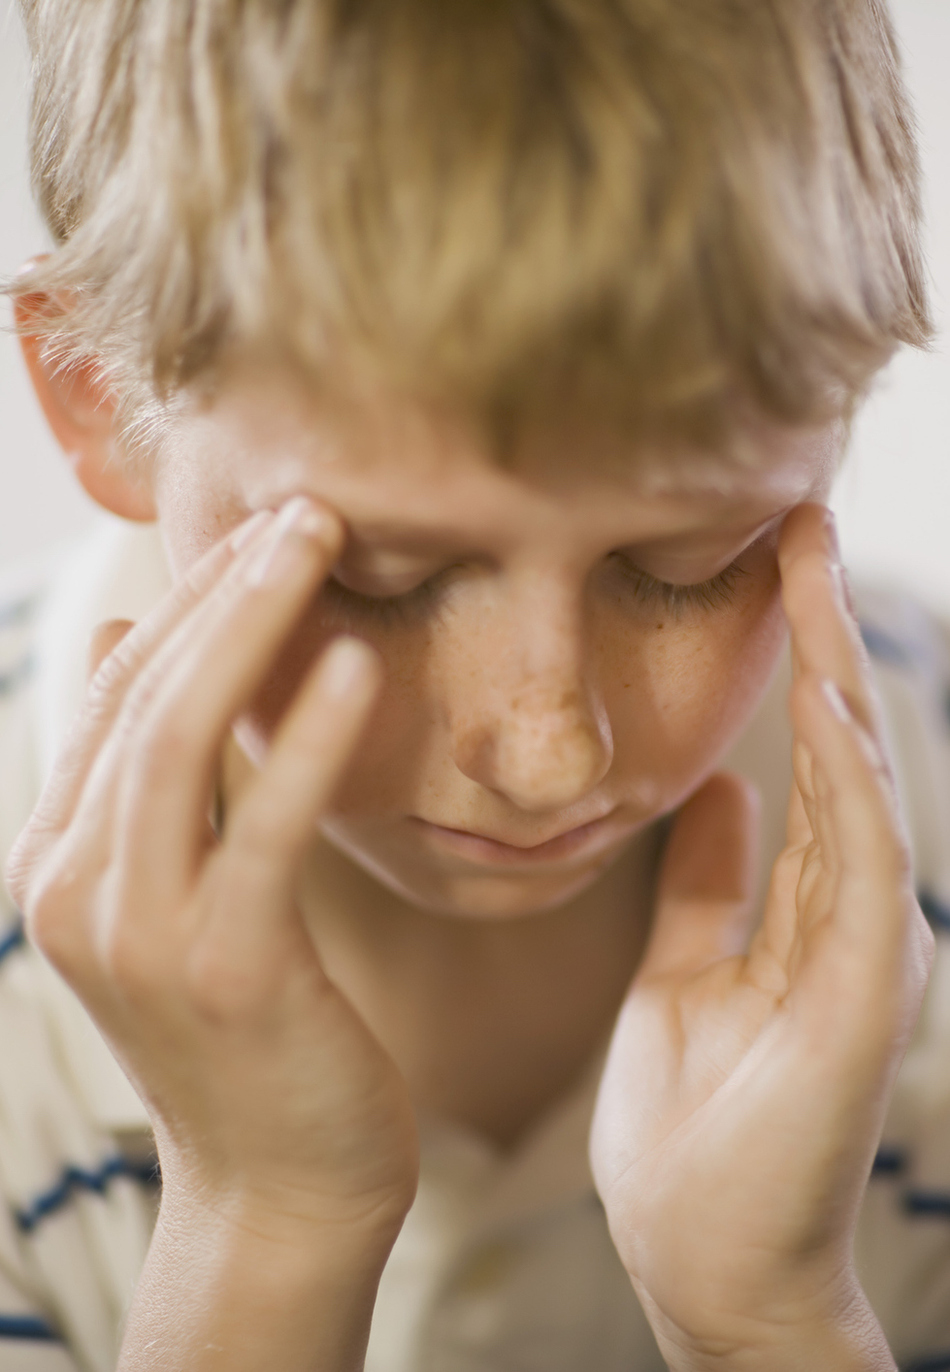 What is Causing Your Child’s Chronic Headaches?